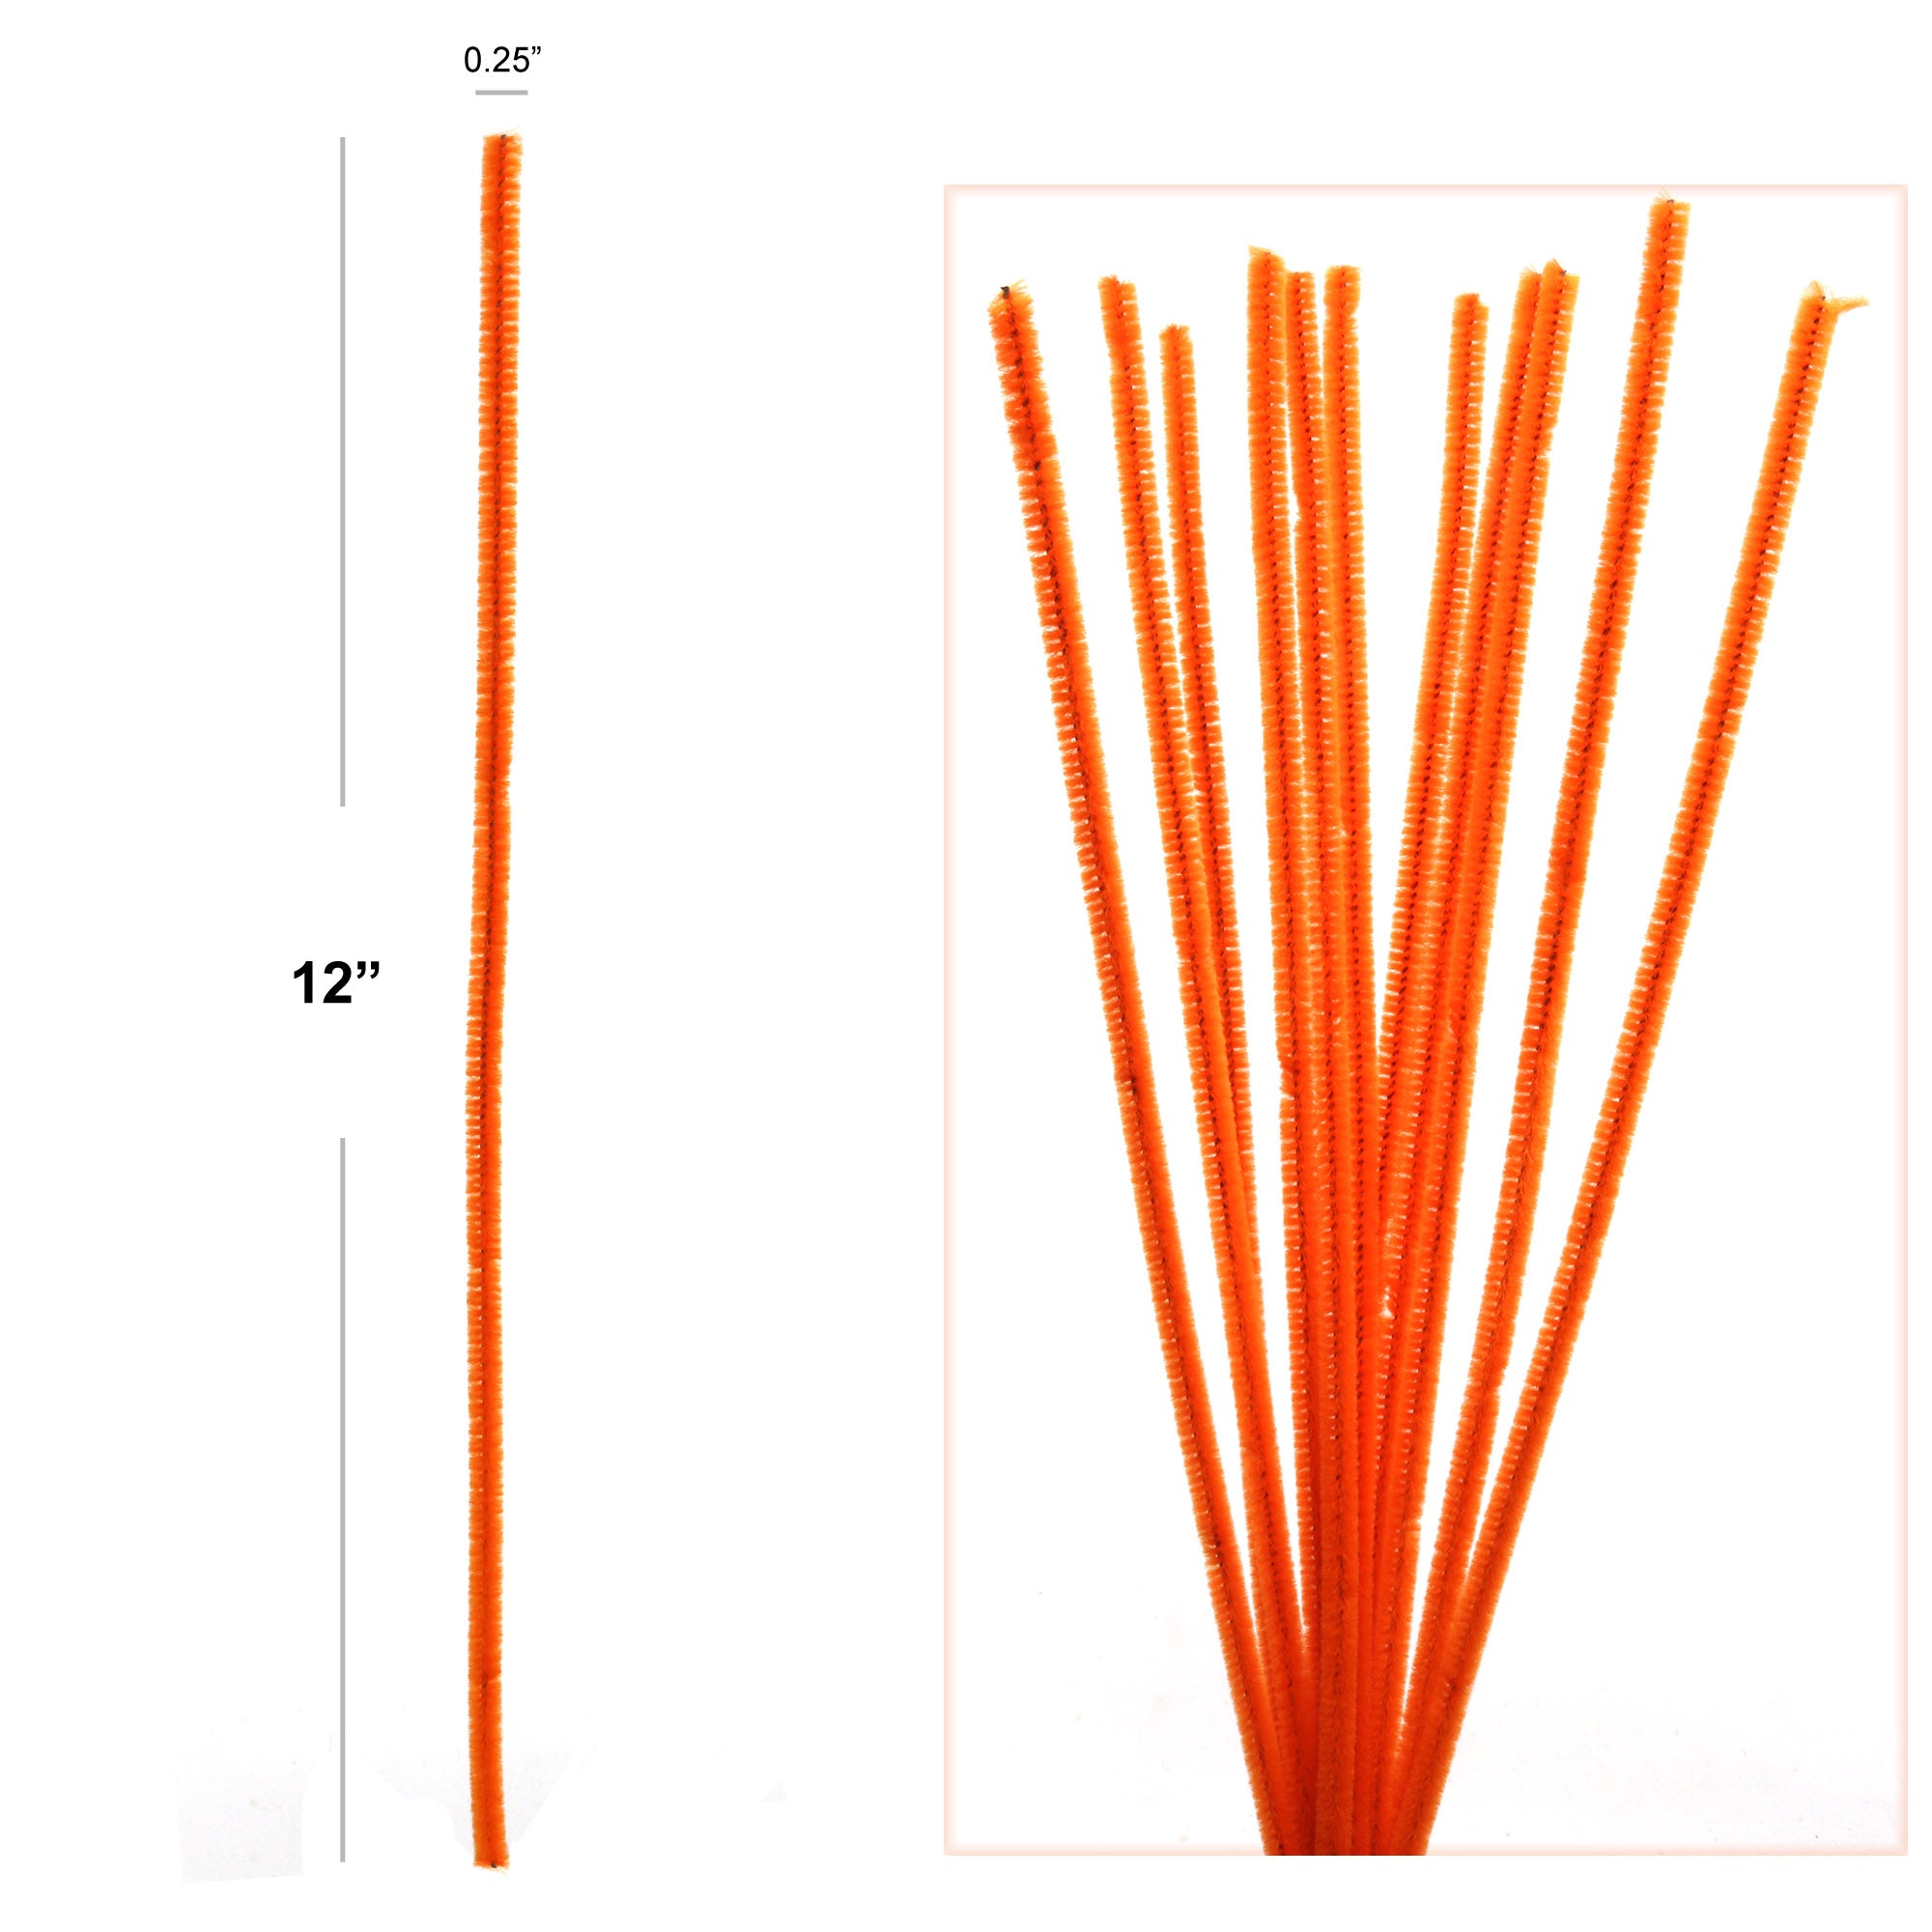 Vibrant Artificial Orange Chenille Stems - Premium Craft Pipe Cleaners for DIY Decor, Art Projects, and Creative Activities - Eco-Friendly & Reusable